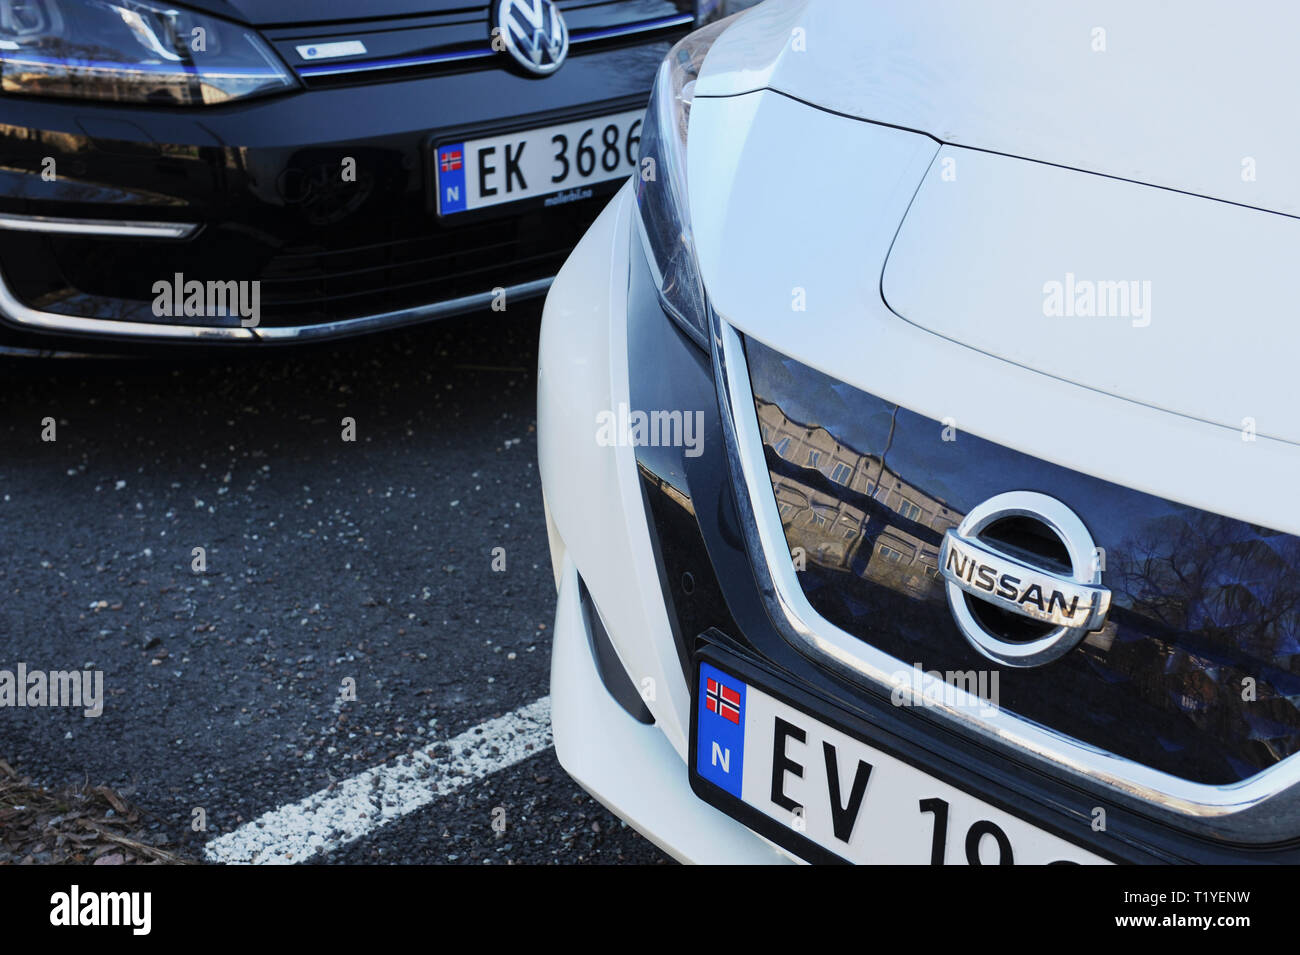 29 March 2019, Norway, Oslo Electric cars are parked in front of an